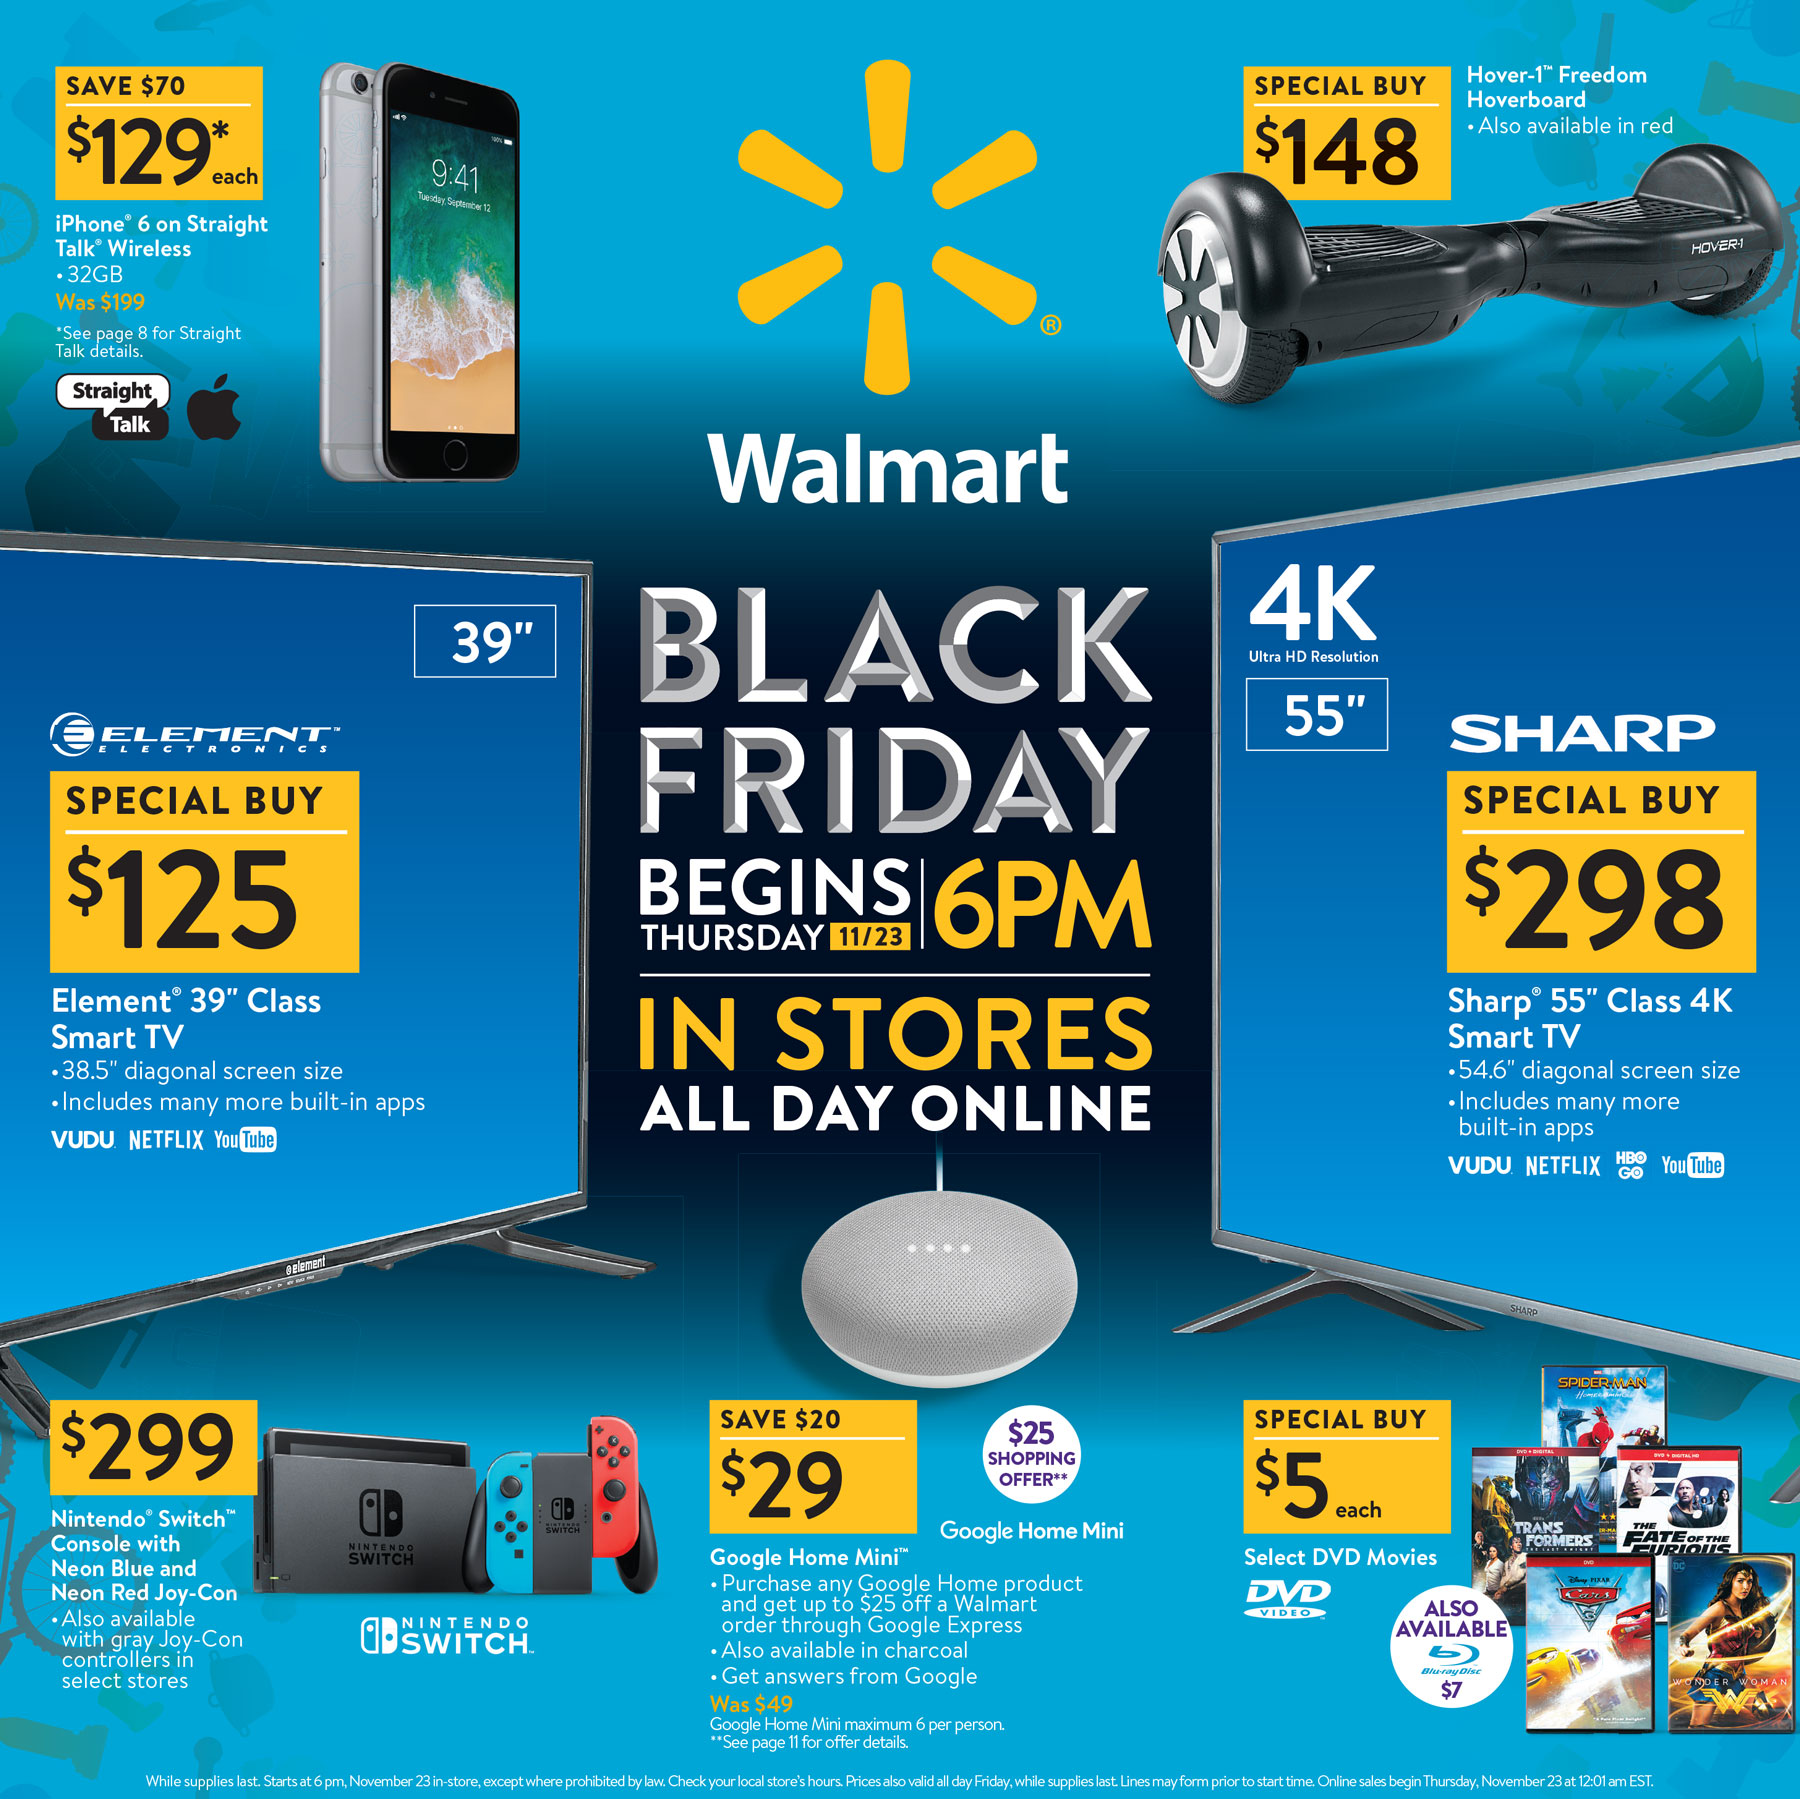 Walmart announces Black Friday 2017 plans Everything you need to know